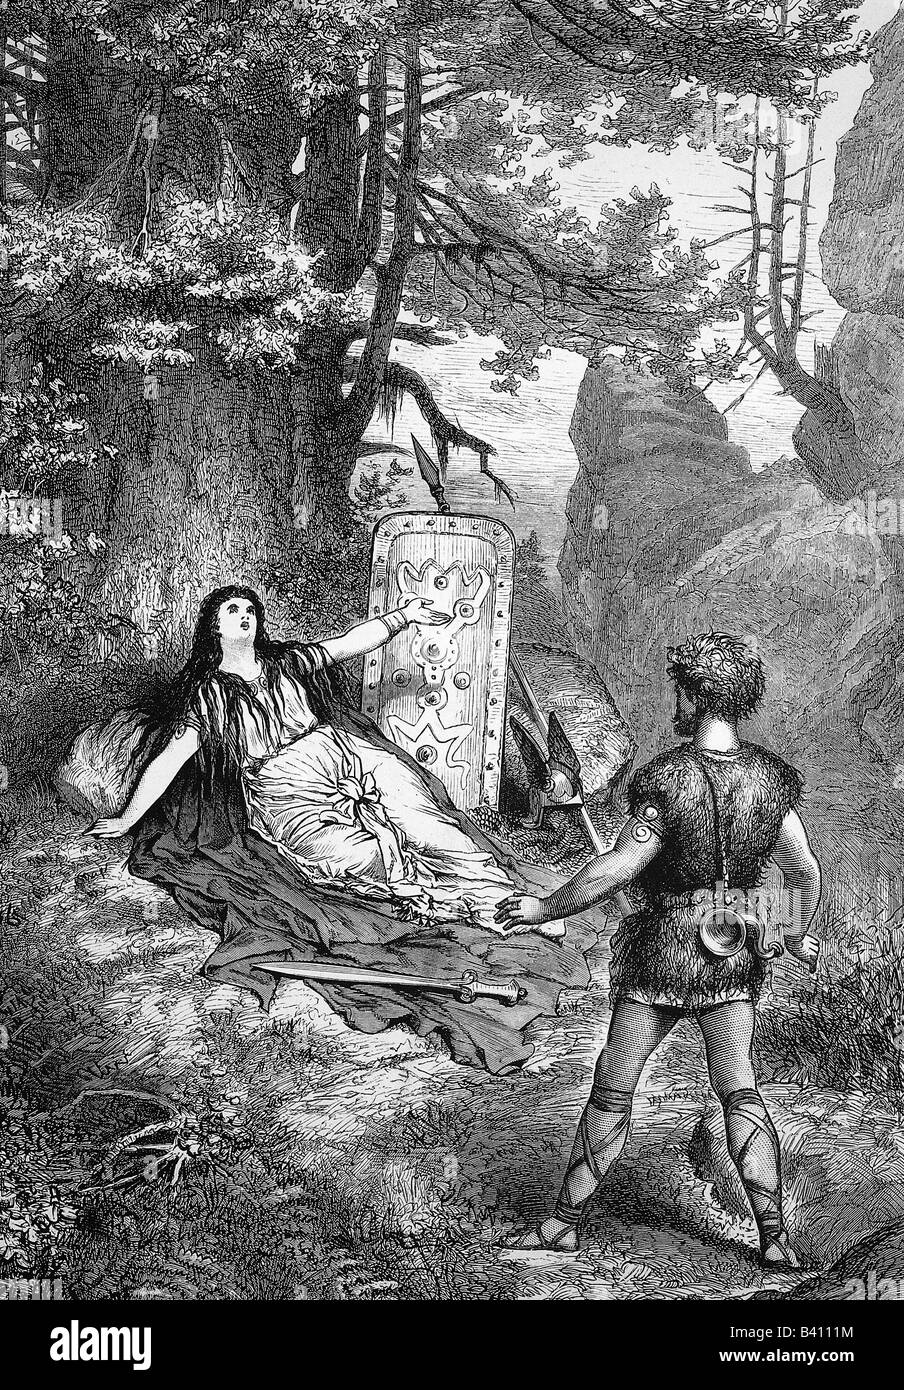 Wagner, Richard, 22.5.1813 - 13.2.1883, German composer, work, opera 'Siegfried', from 'The Ring of the Nibelung' (Der Ring des Nibelungen), 3rd act, scene: awaking of Brunhild by Siegfried, wood engraving after drawing by Knut Ekvall, 19th century, Stock Photo